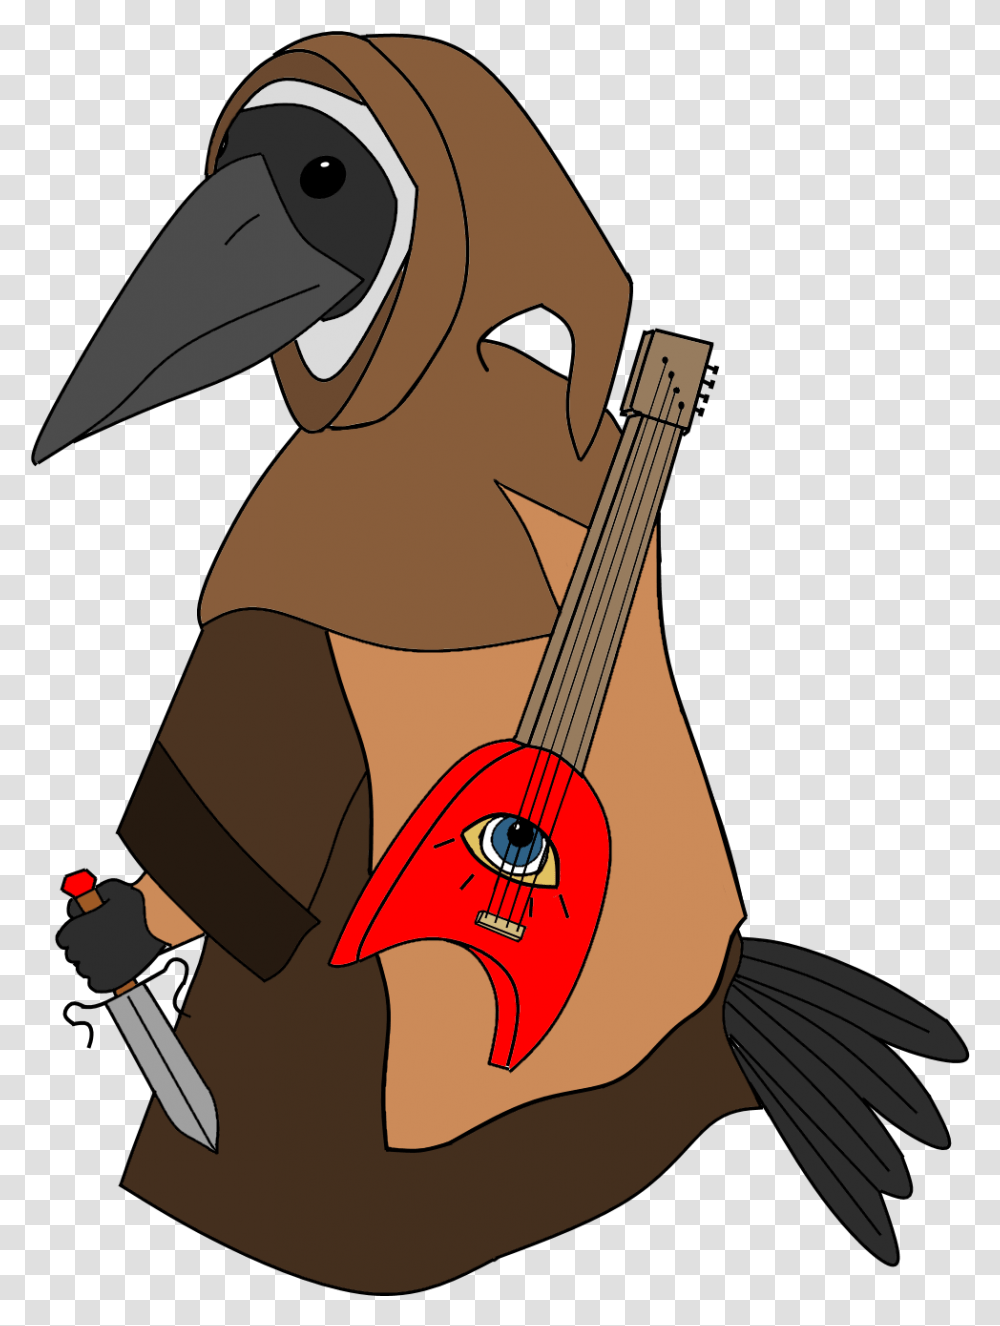 Kiwi Bird Clipart Dungeons Amp Dragons, Lute, Musical Instrument, Cello, Leisure Activities Transparent Png